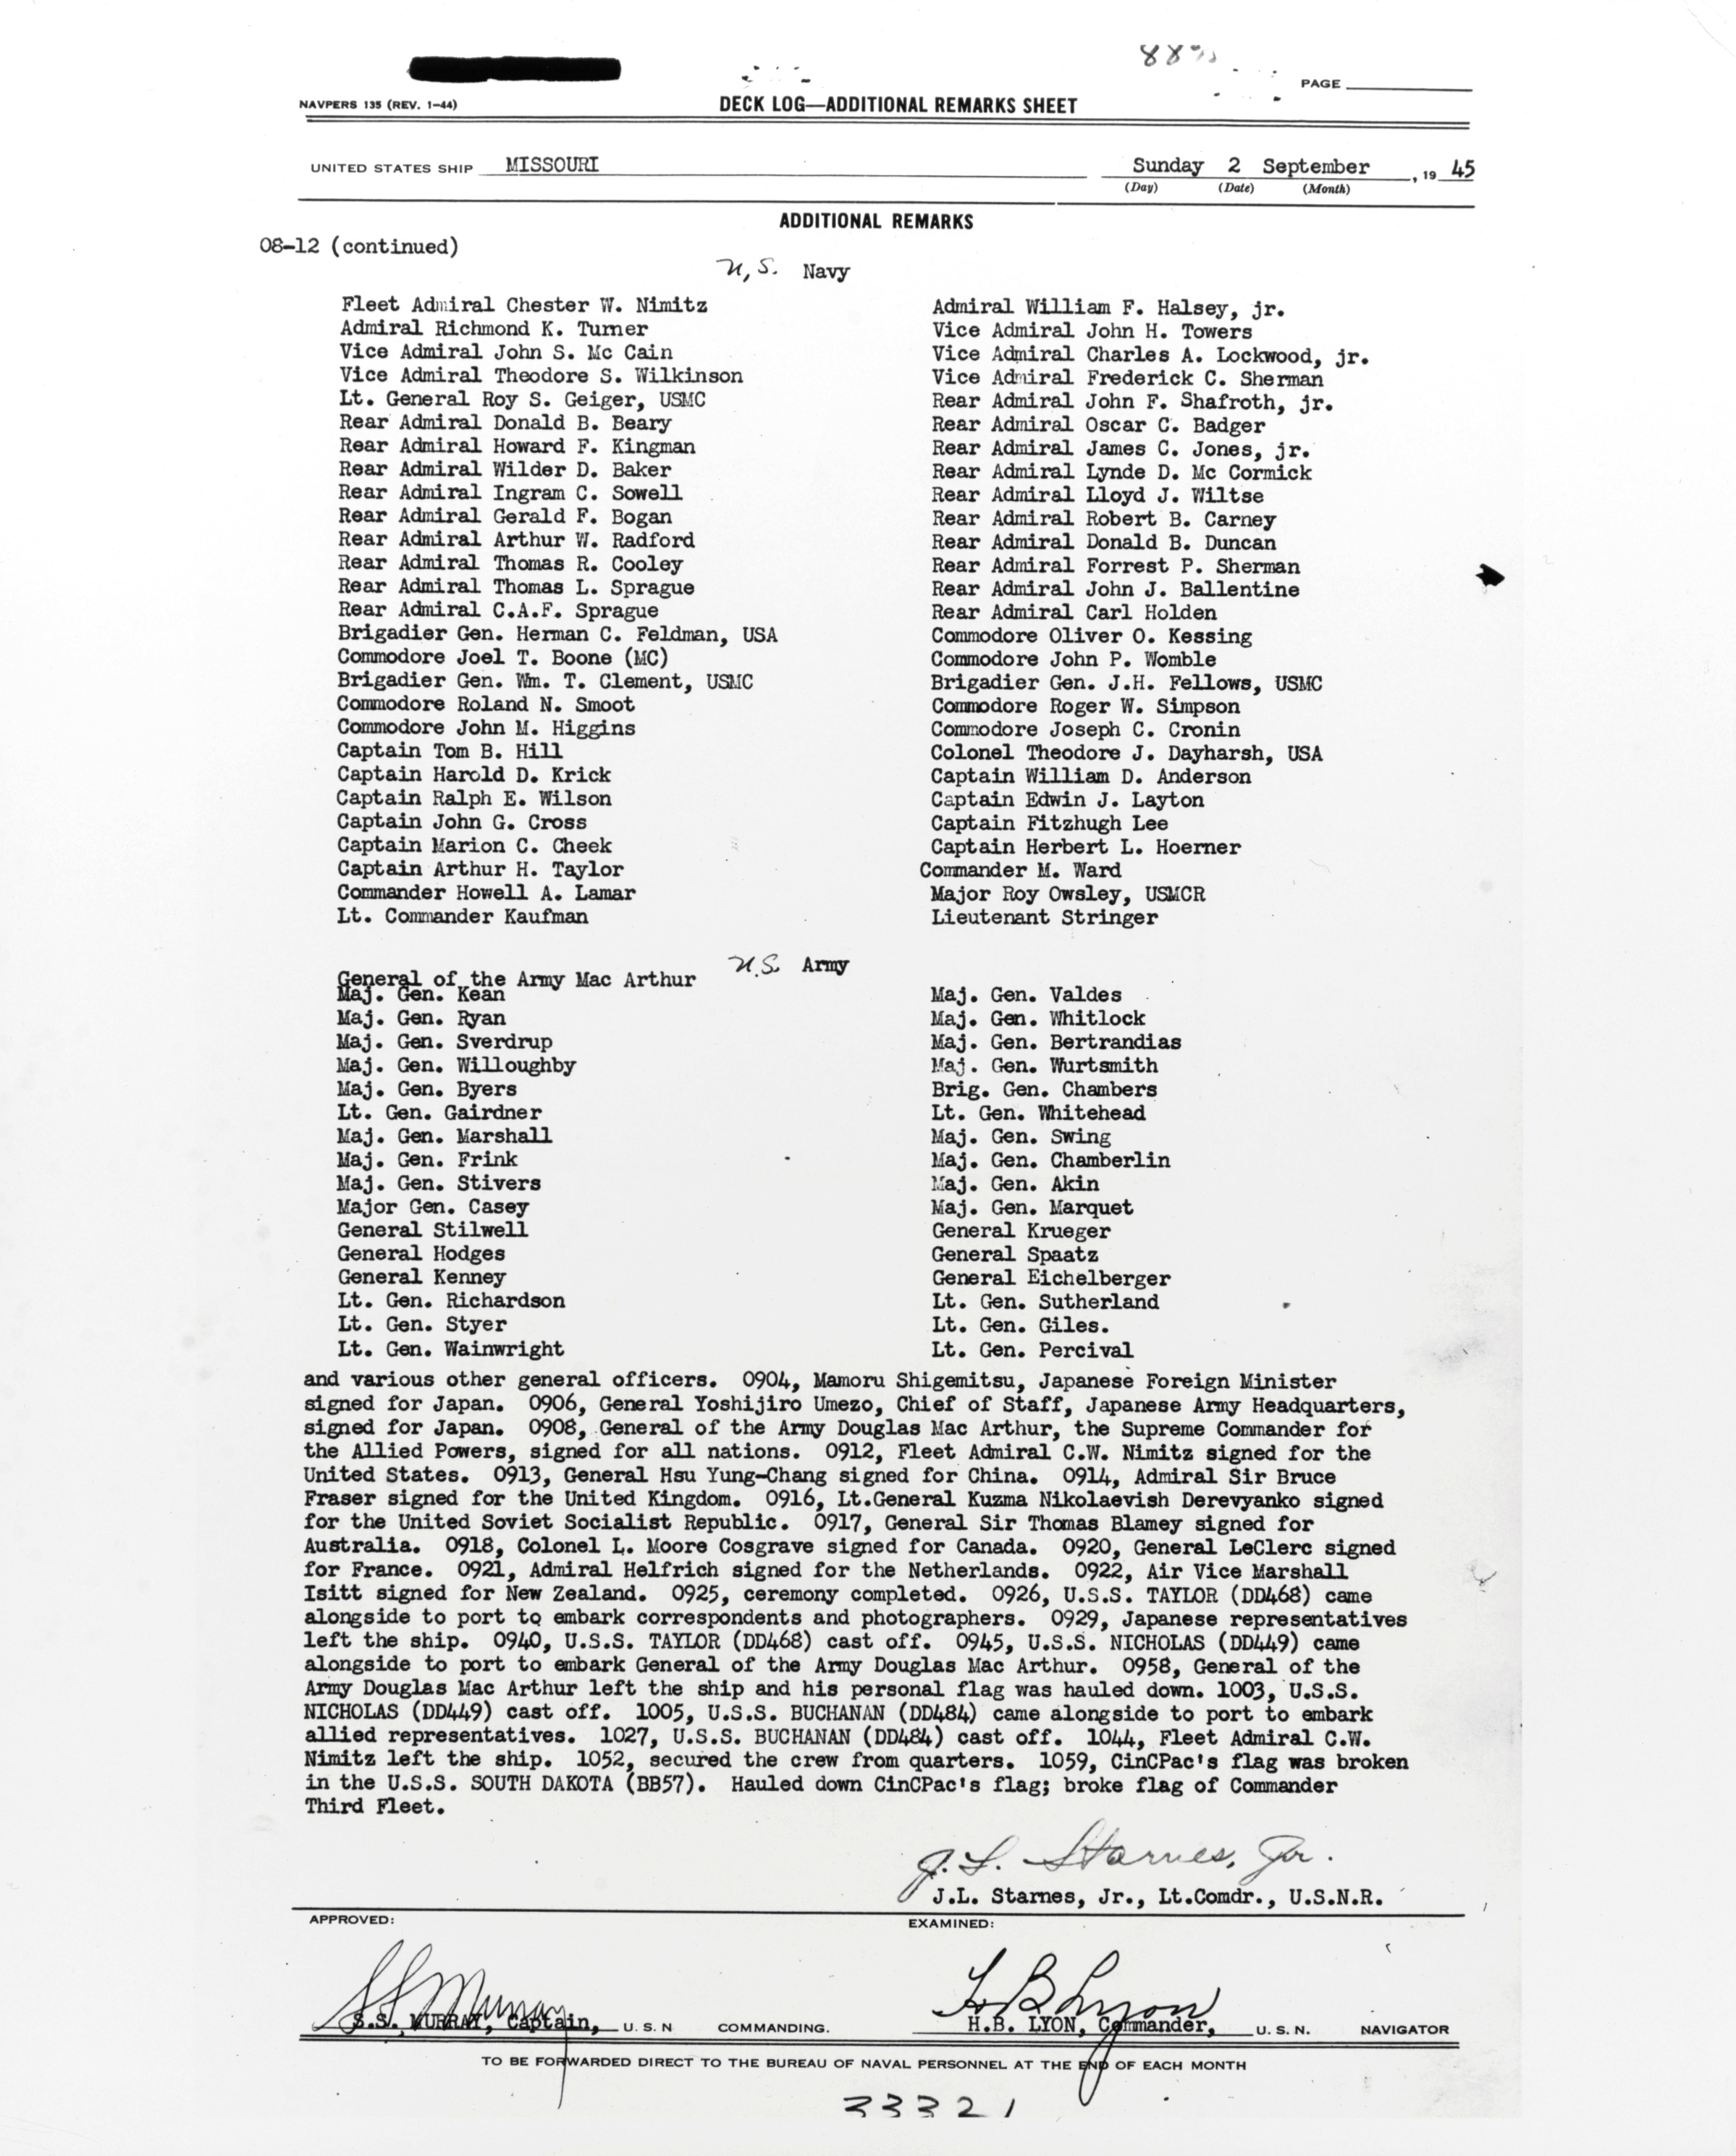 One page from the USS Missouri deck log for 2 Sep 1945 listing many of the dignitaries who came aboard for the surrender ceremony in Tokyo Bay, Japan.